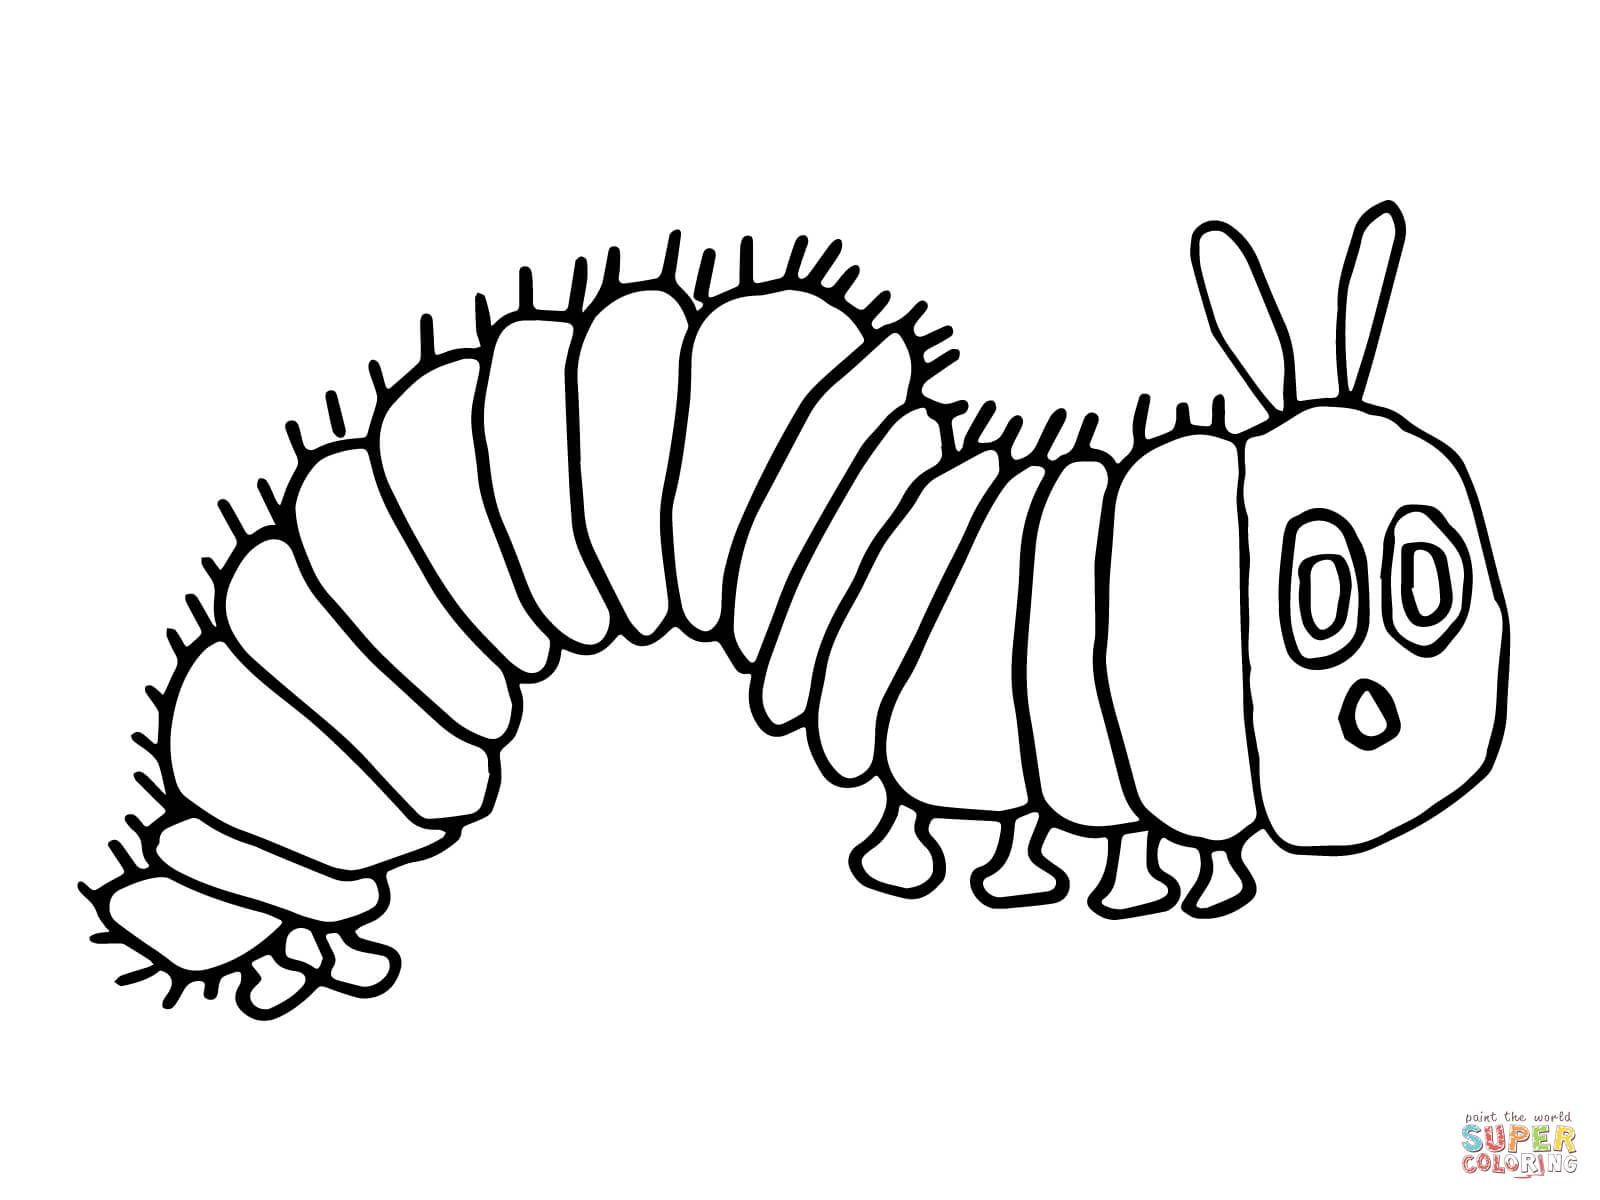 Very hungry caterpillar coloring pages to download and print for free